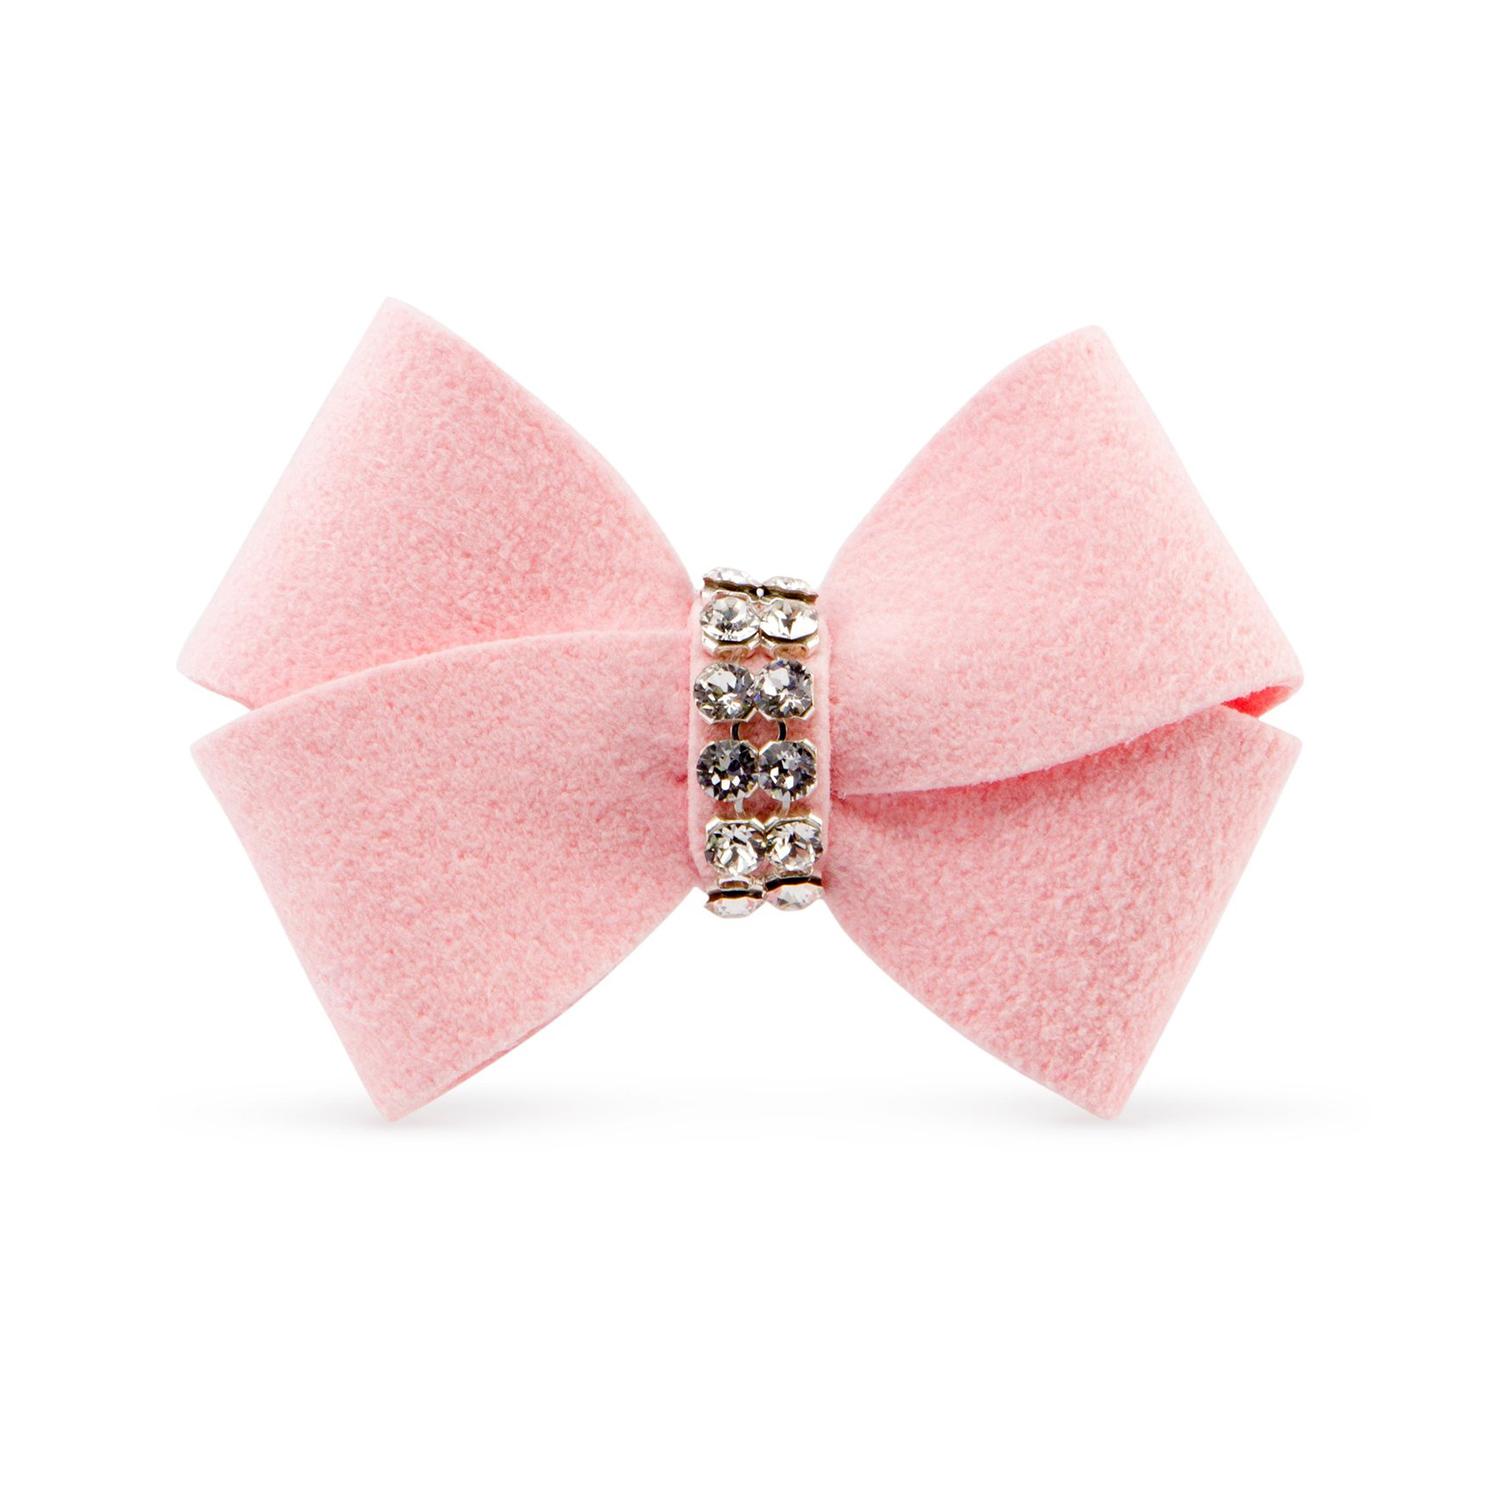 Nouveau Bow Dog Hair Bow by Susan Lanci - Puppy Pink